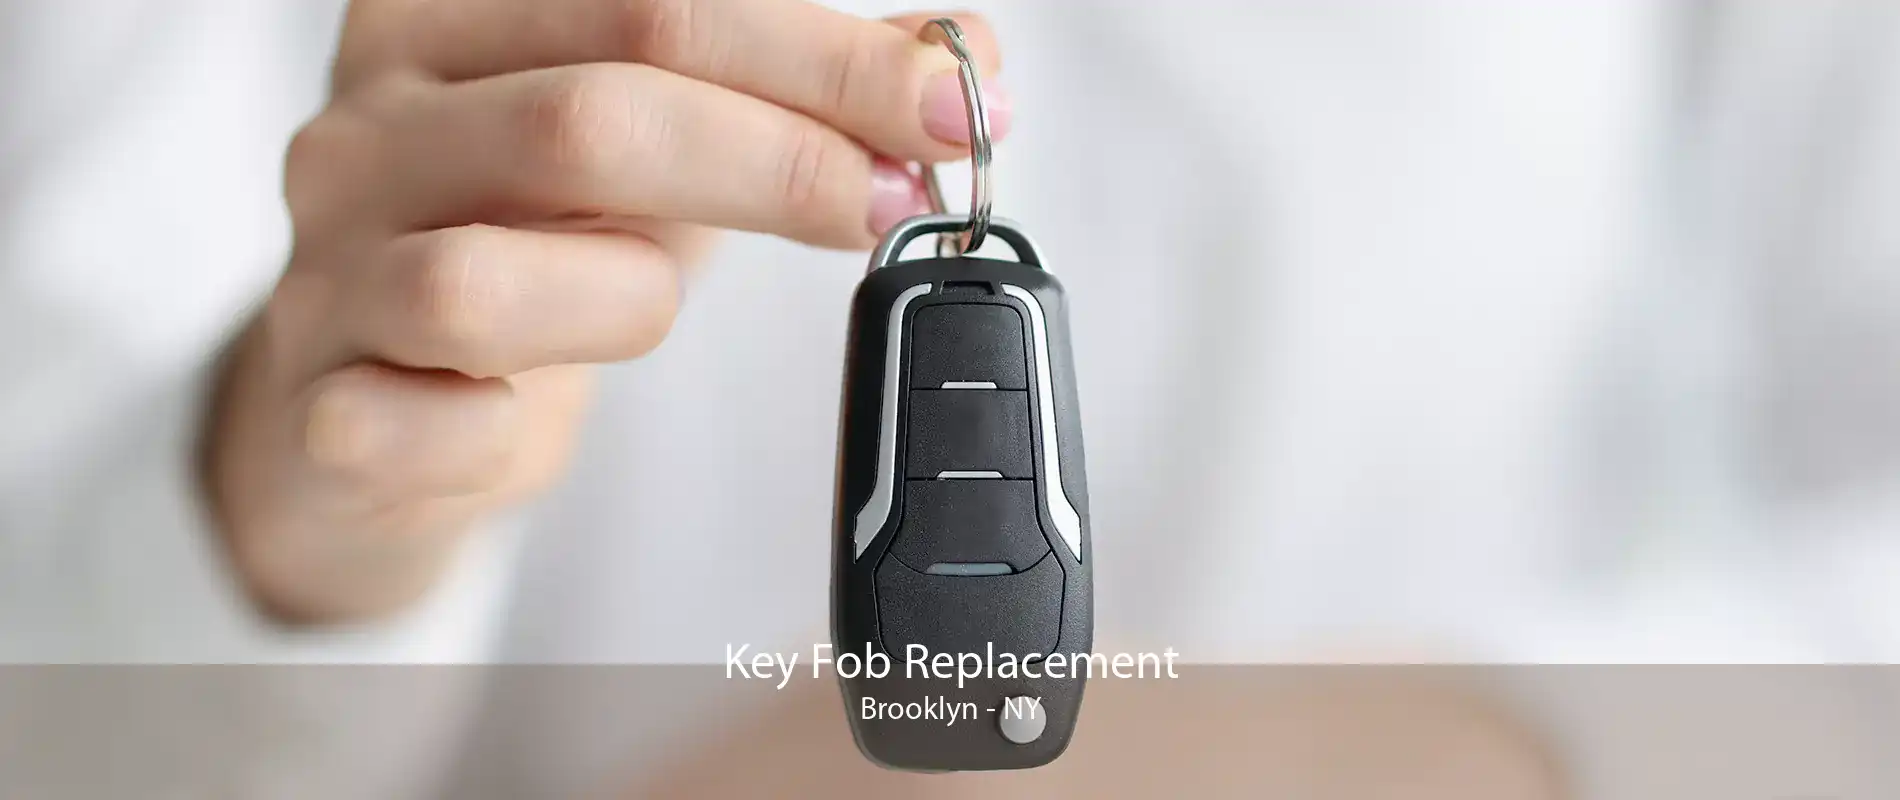 Key Fob Replacement Brooklyn - NY